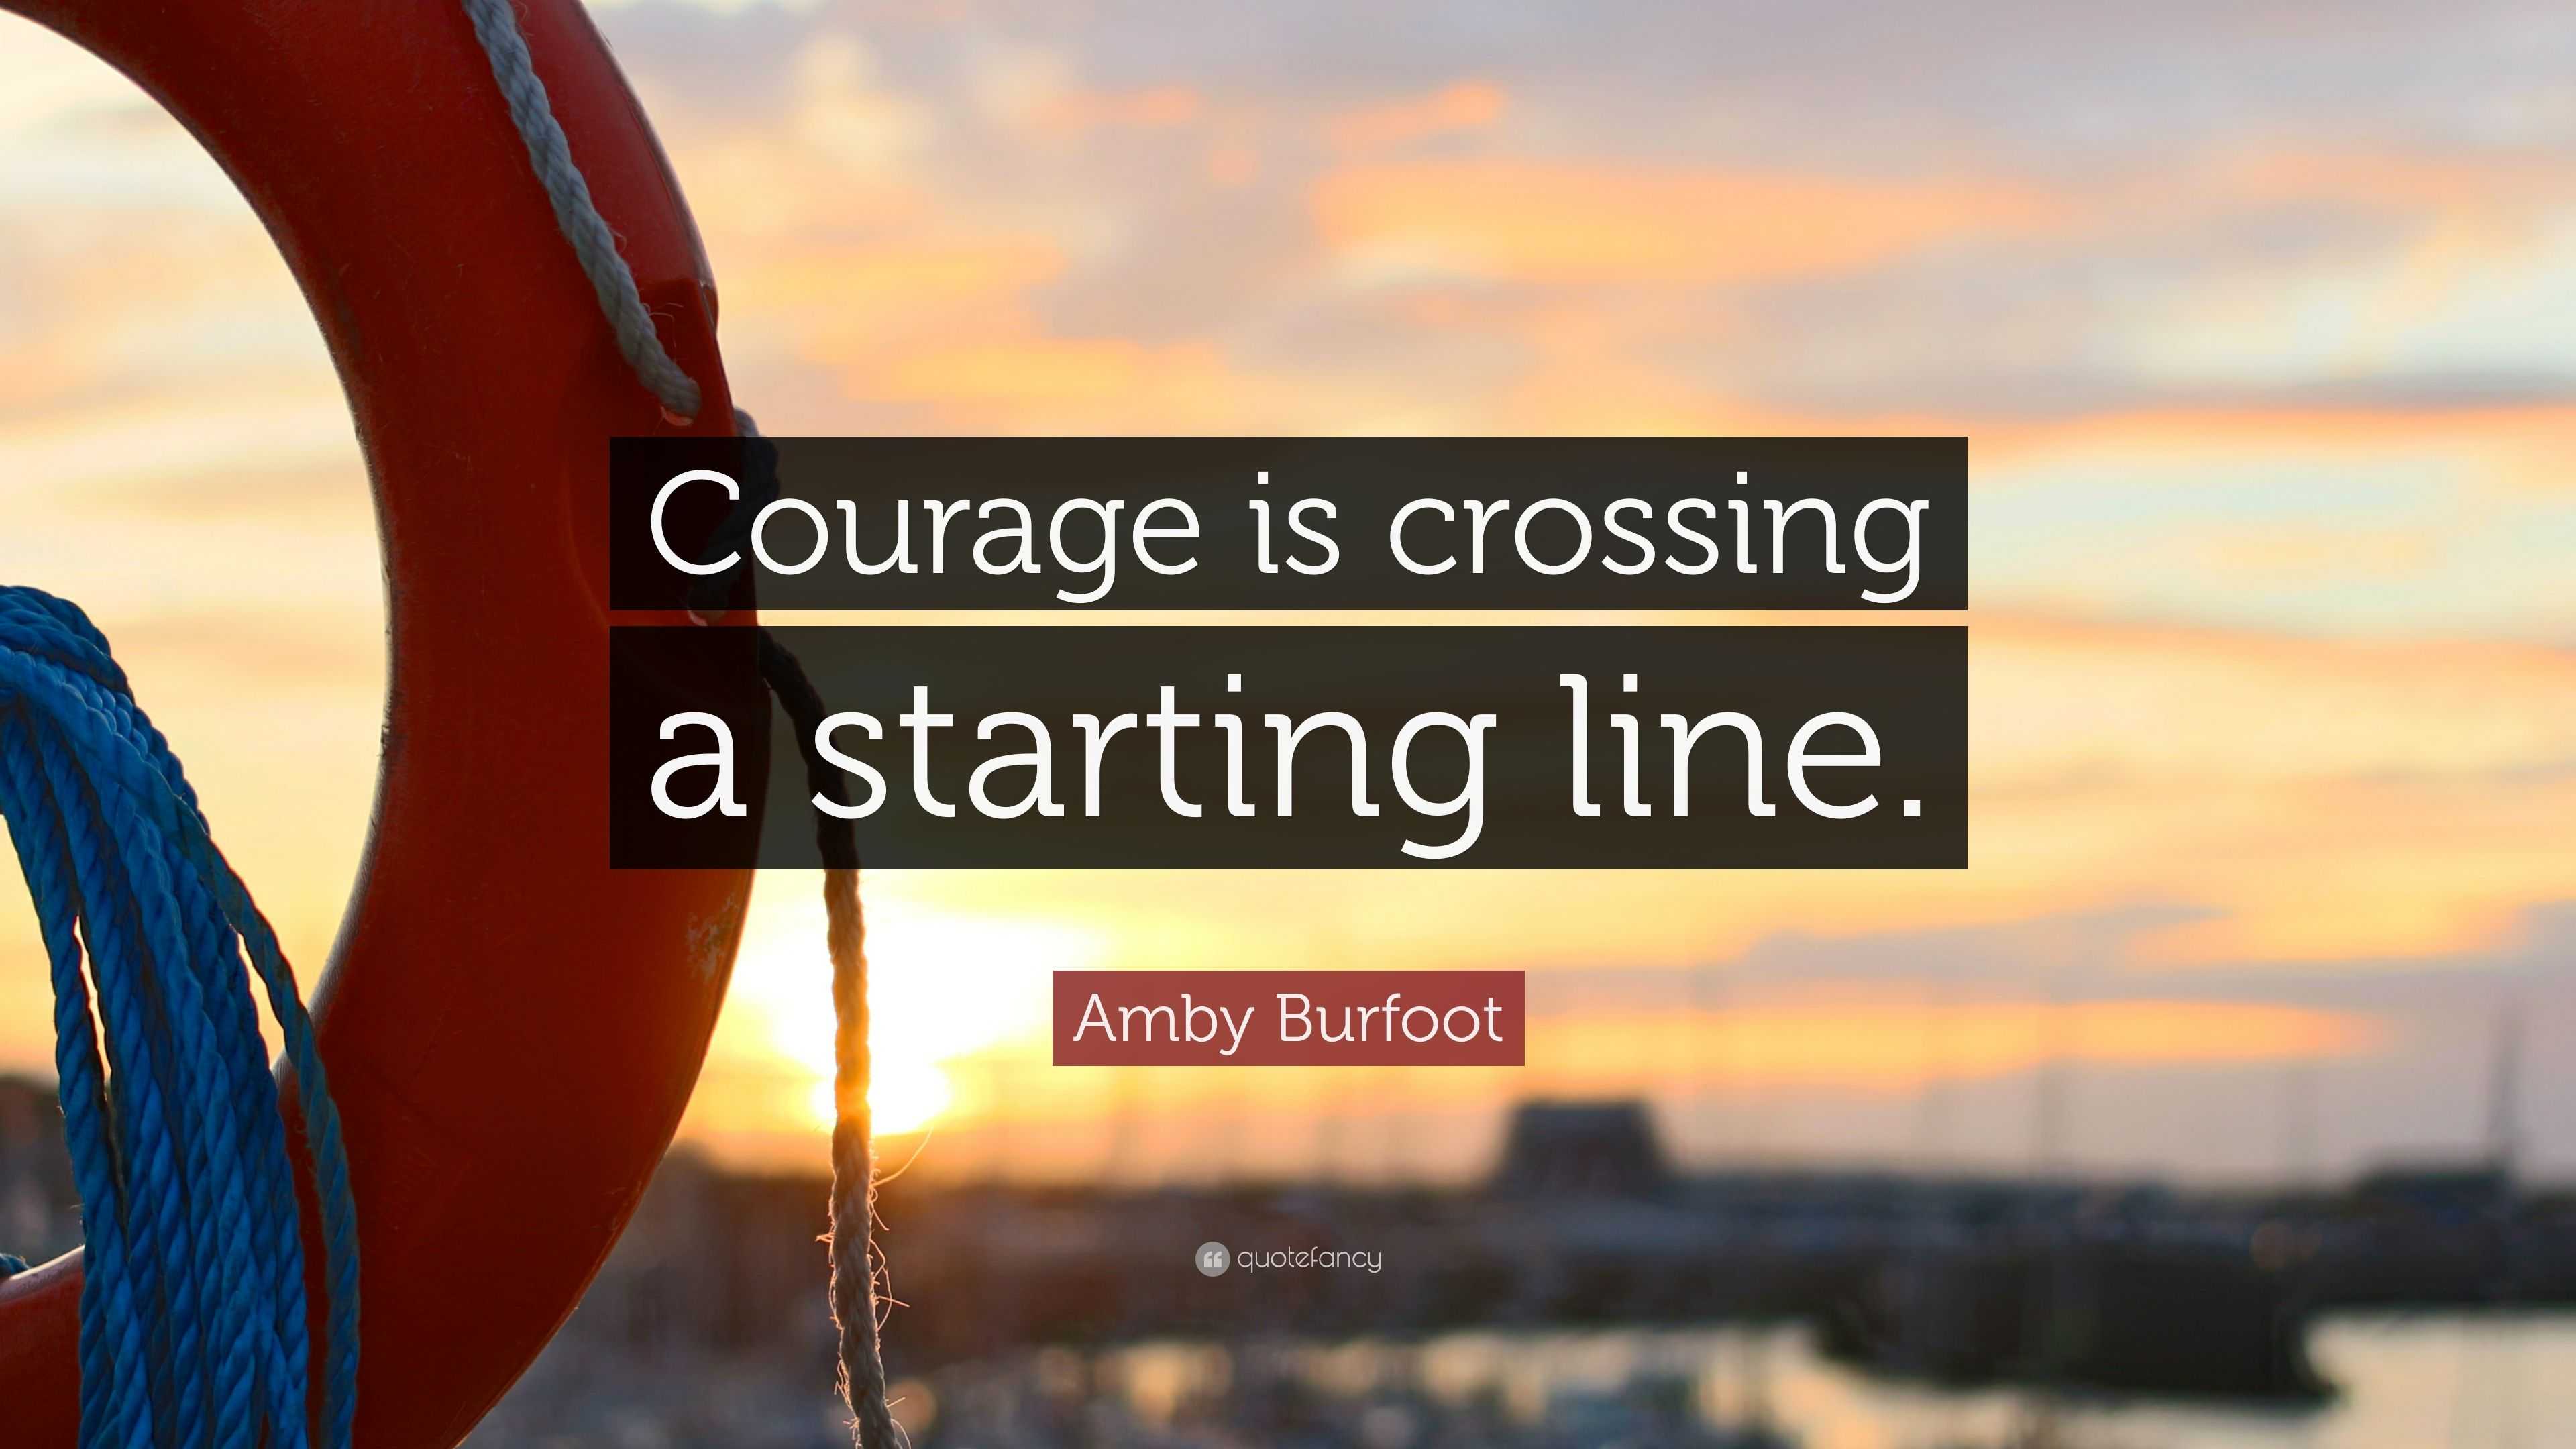 Amby Burfoot Quote: “Courage is crossing a starting line.”